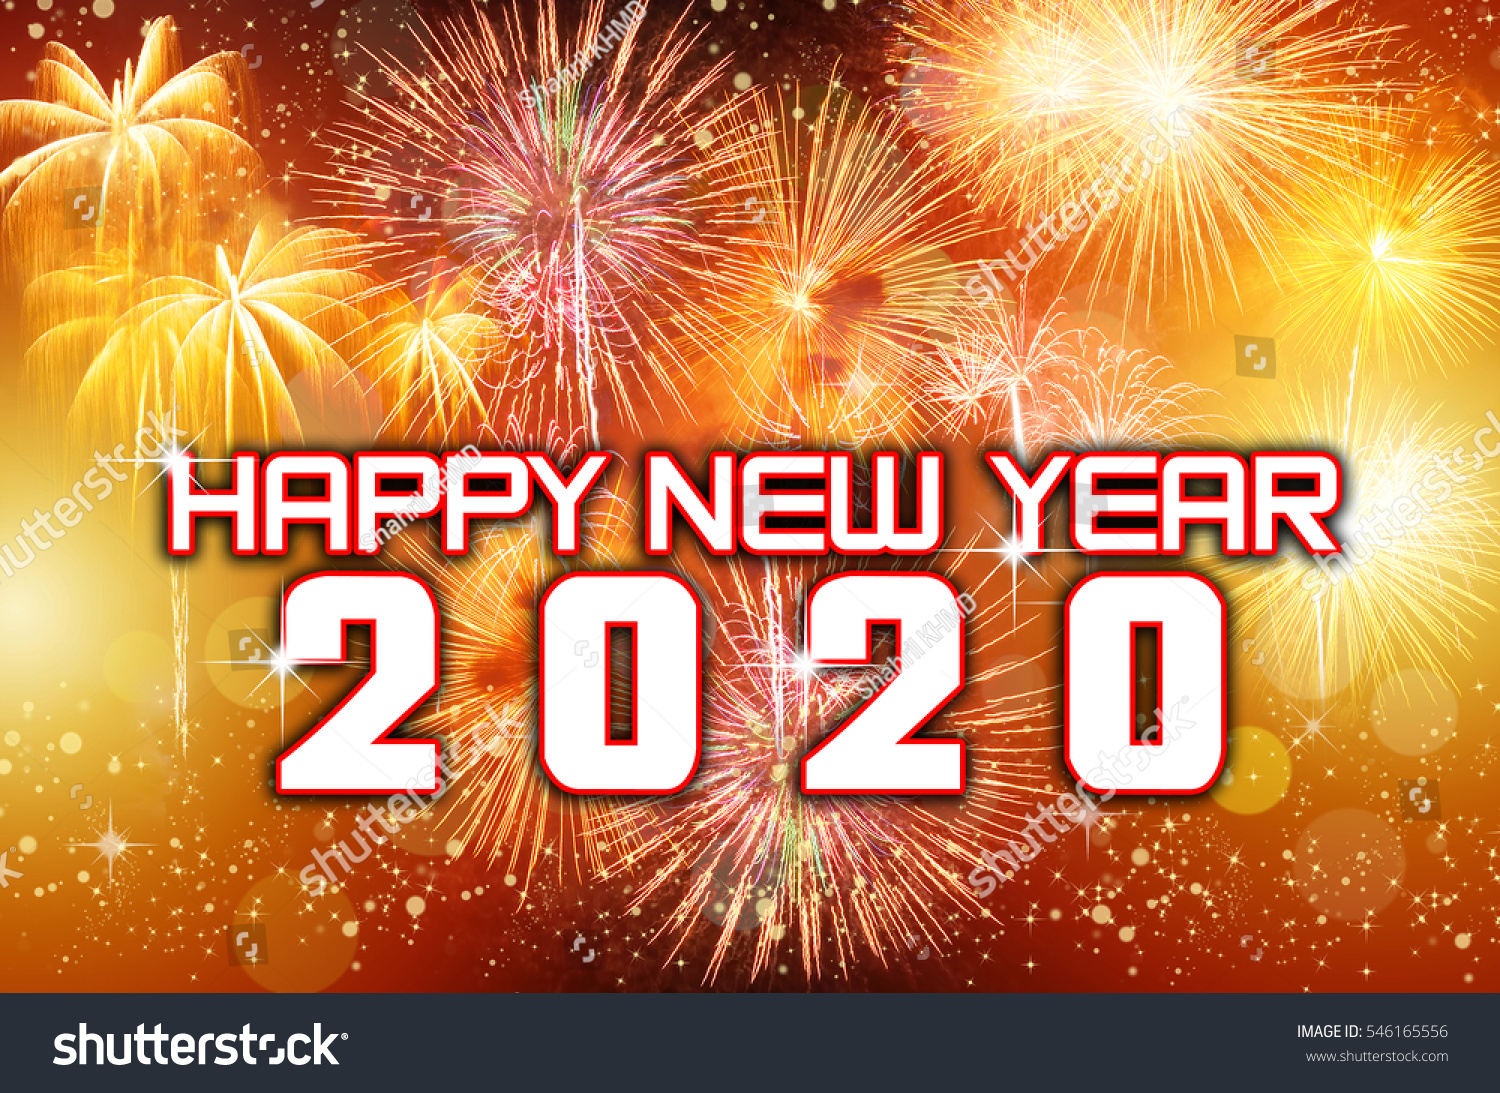 Happy New Year 2020 Colorful Fireworks Stock Photo 546165556 Shutterstock